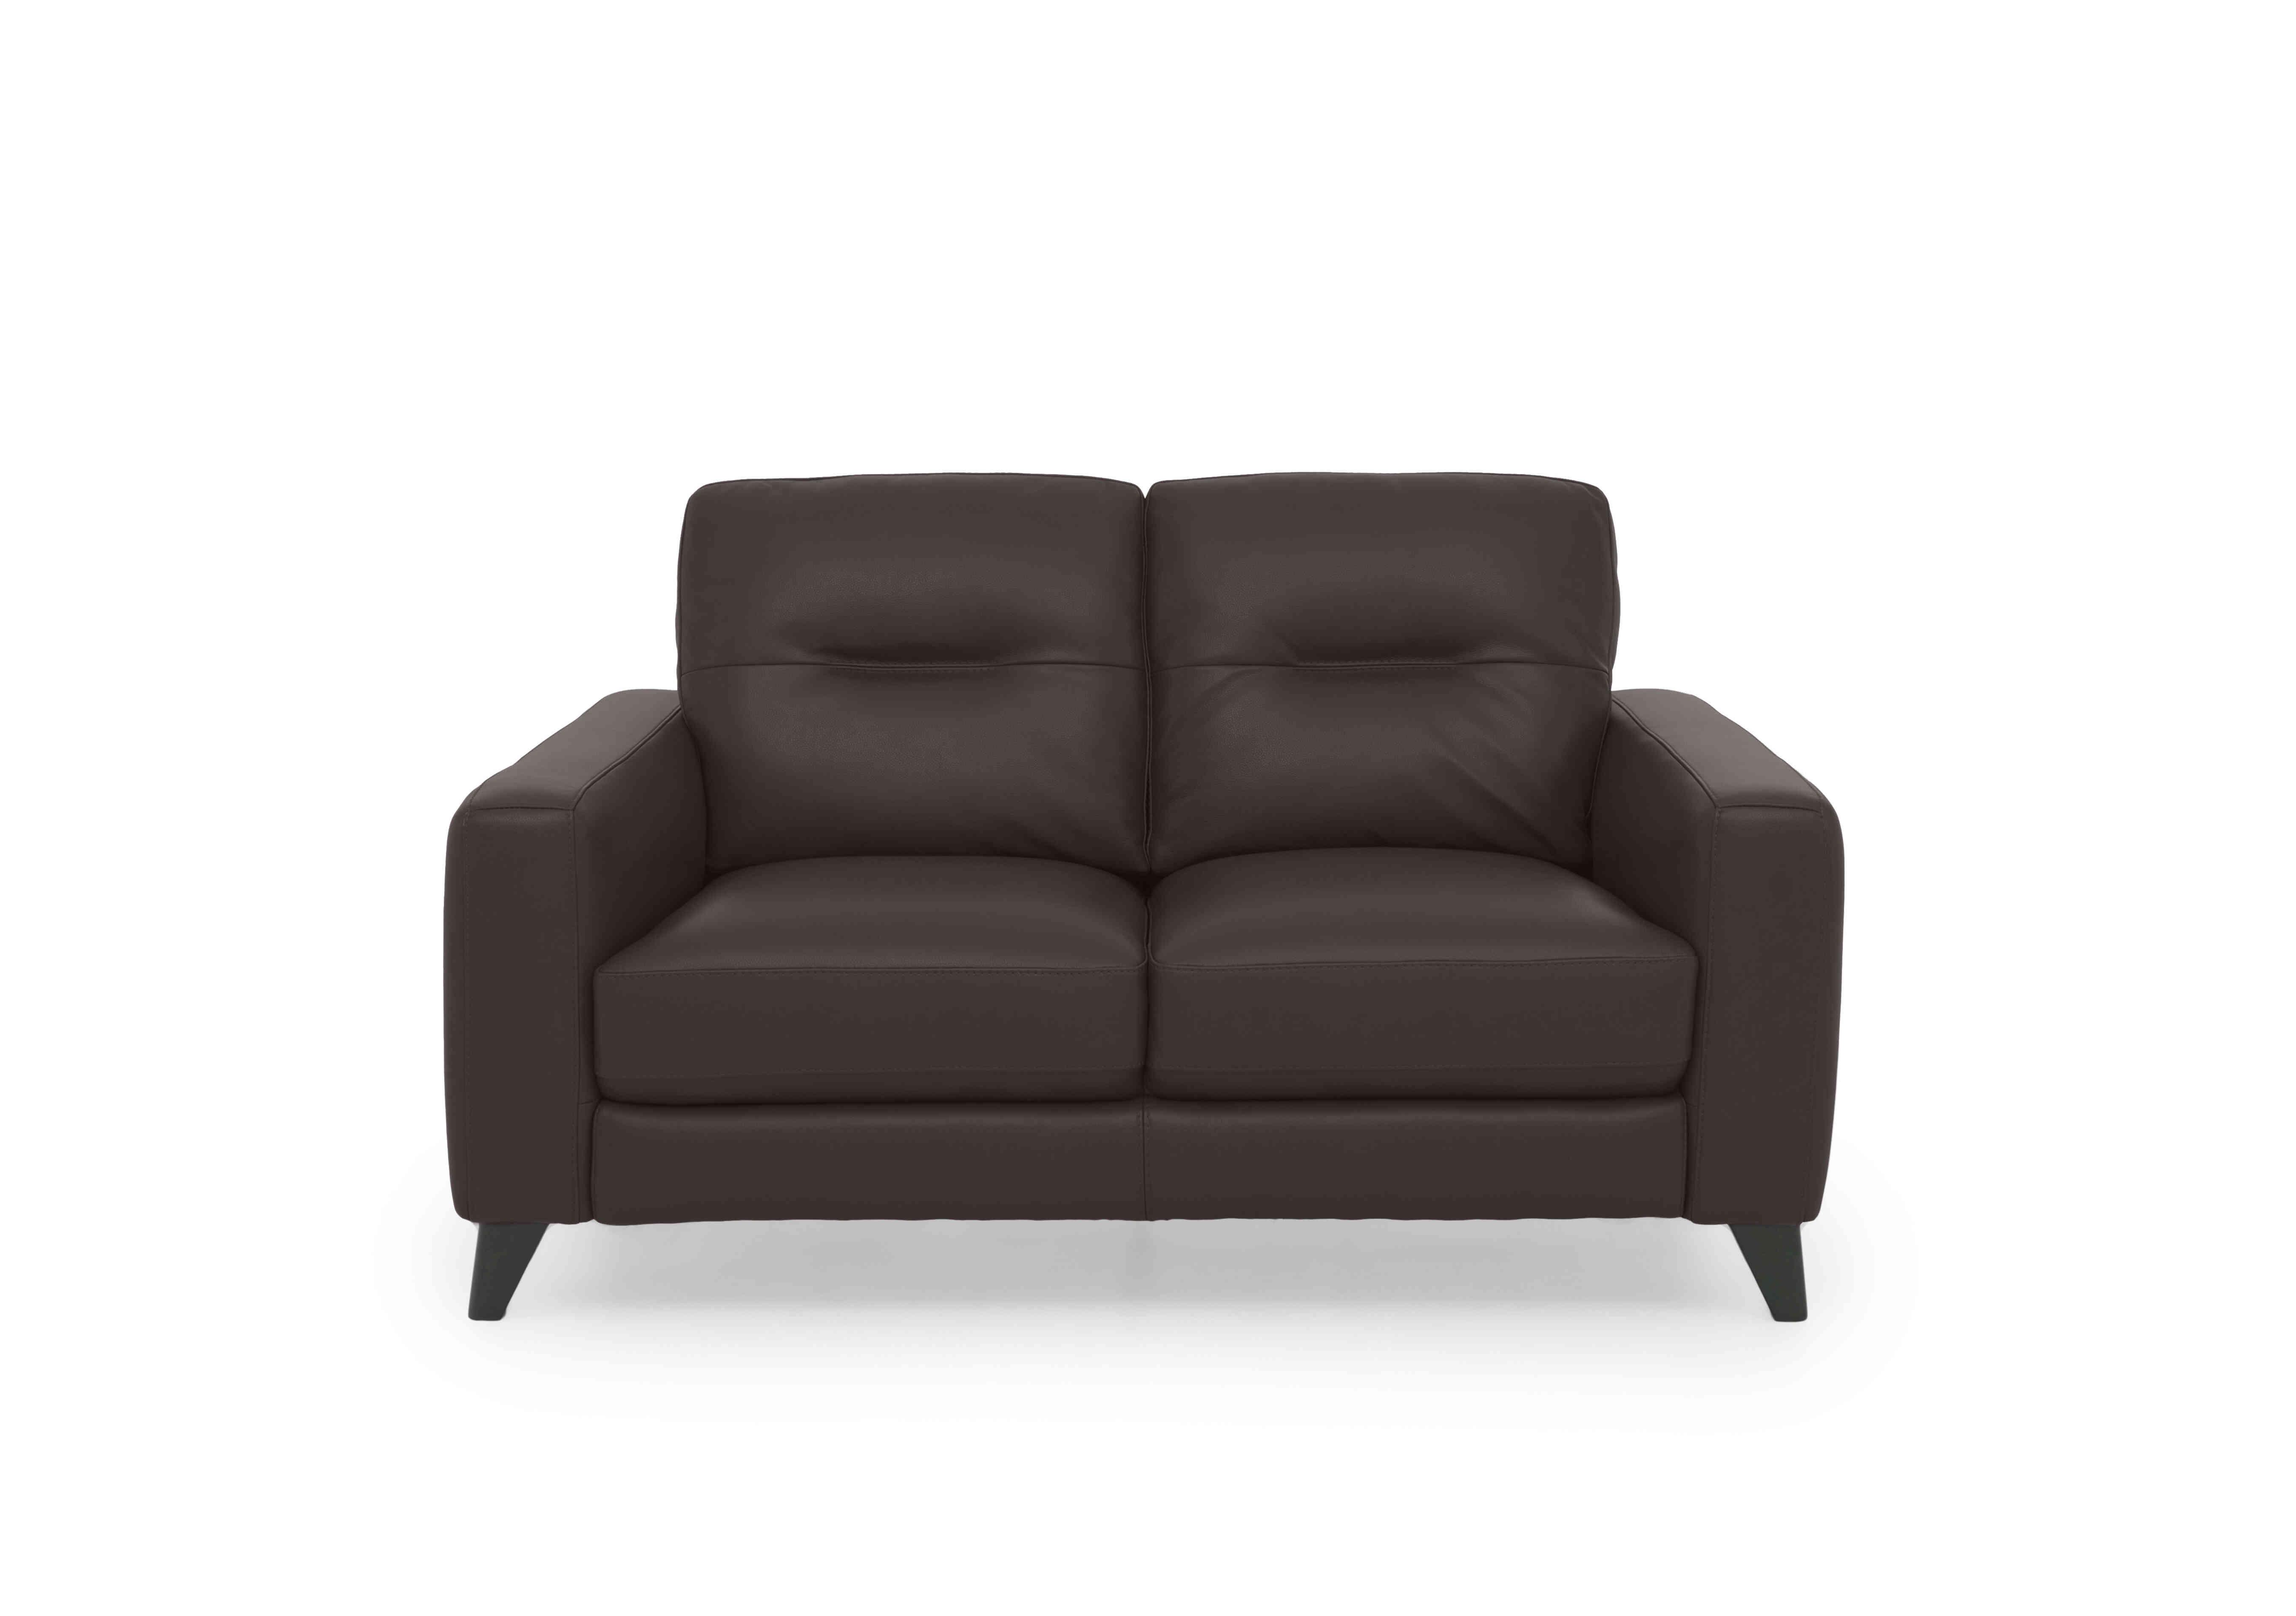 Jules 2 Seater Leather Sofa in An-727b Dark Brown on Furniture Village